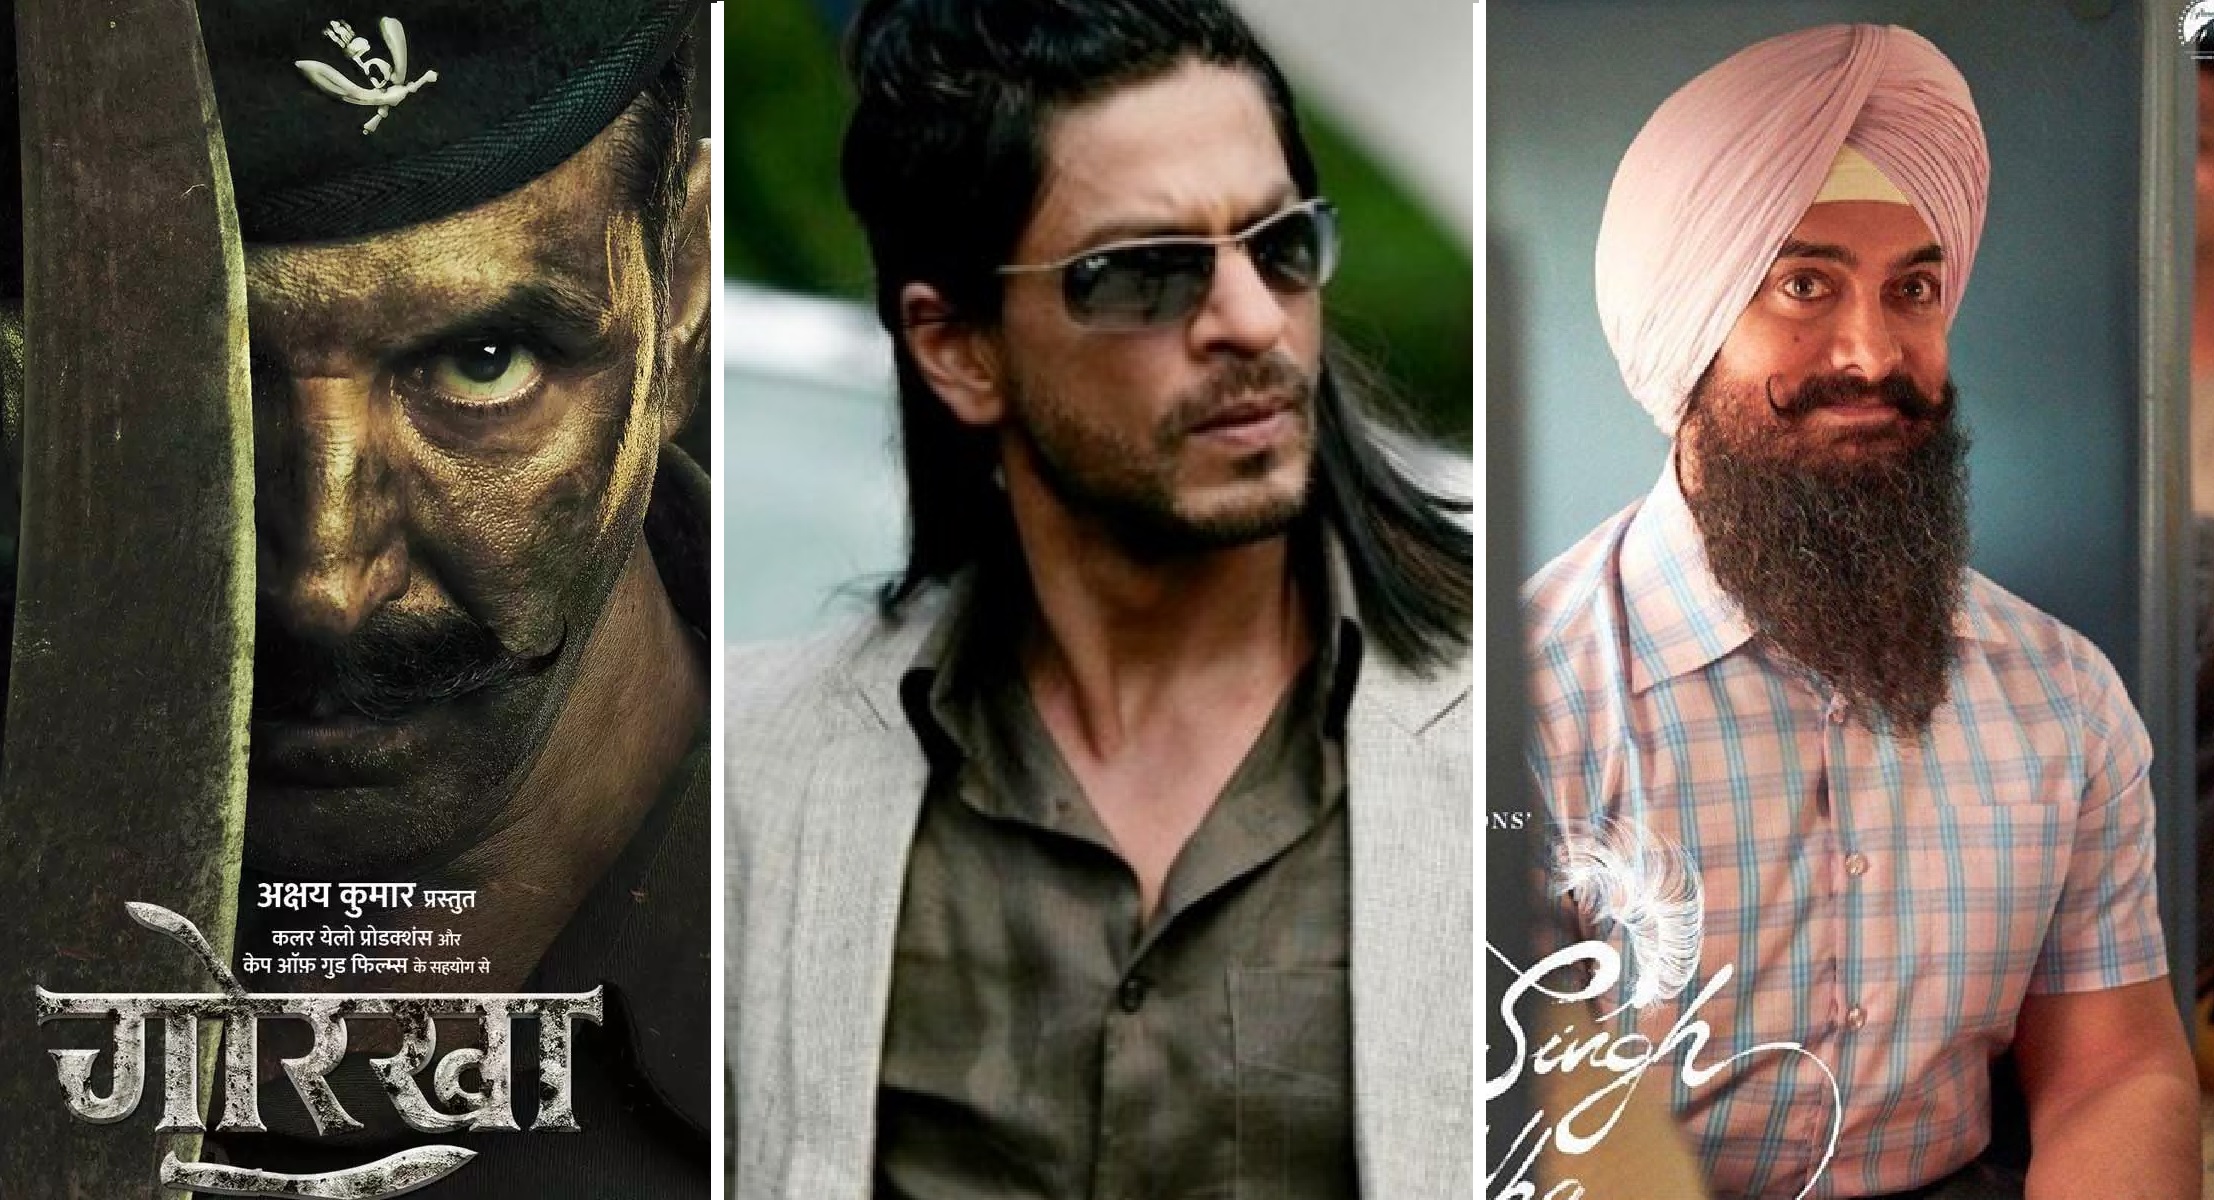 Pathan VS Laal Singh Chaddha VS Gorkha – Which Film Are You Looking Forward To The Most? Vote Here!